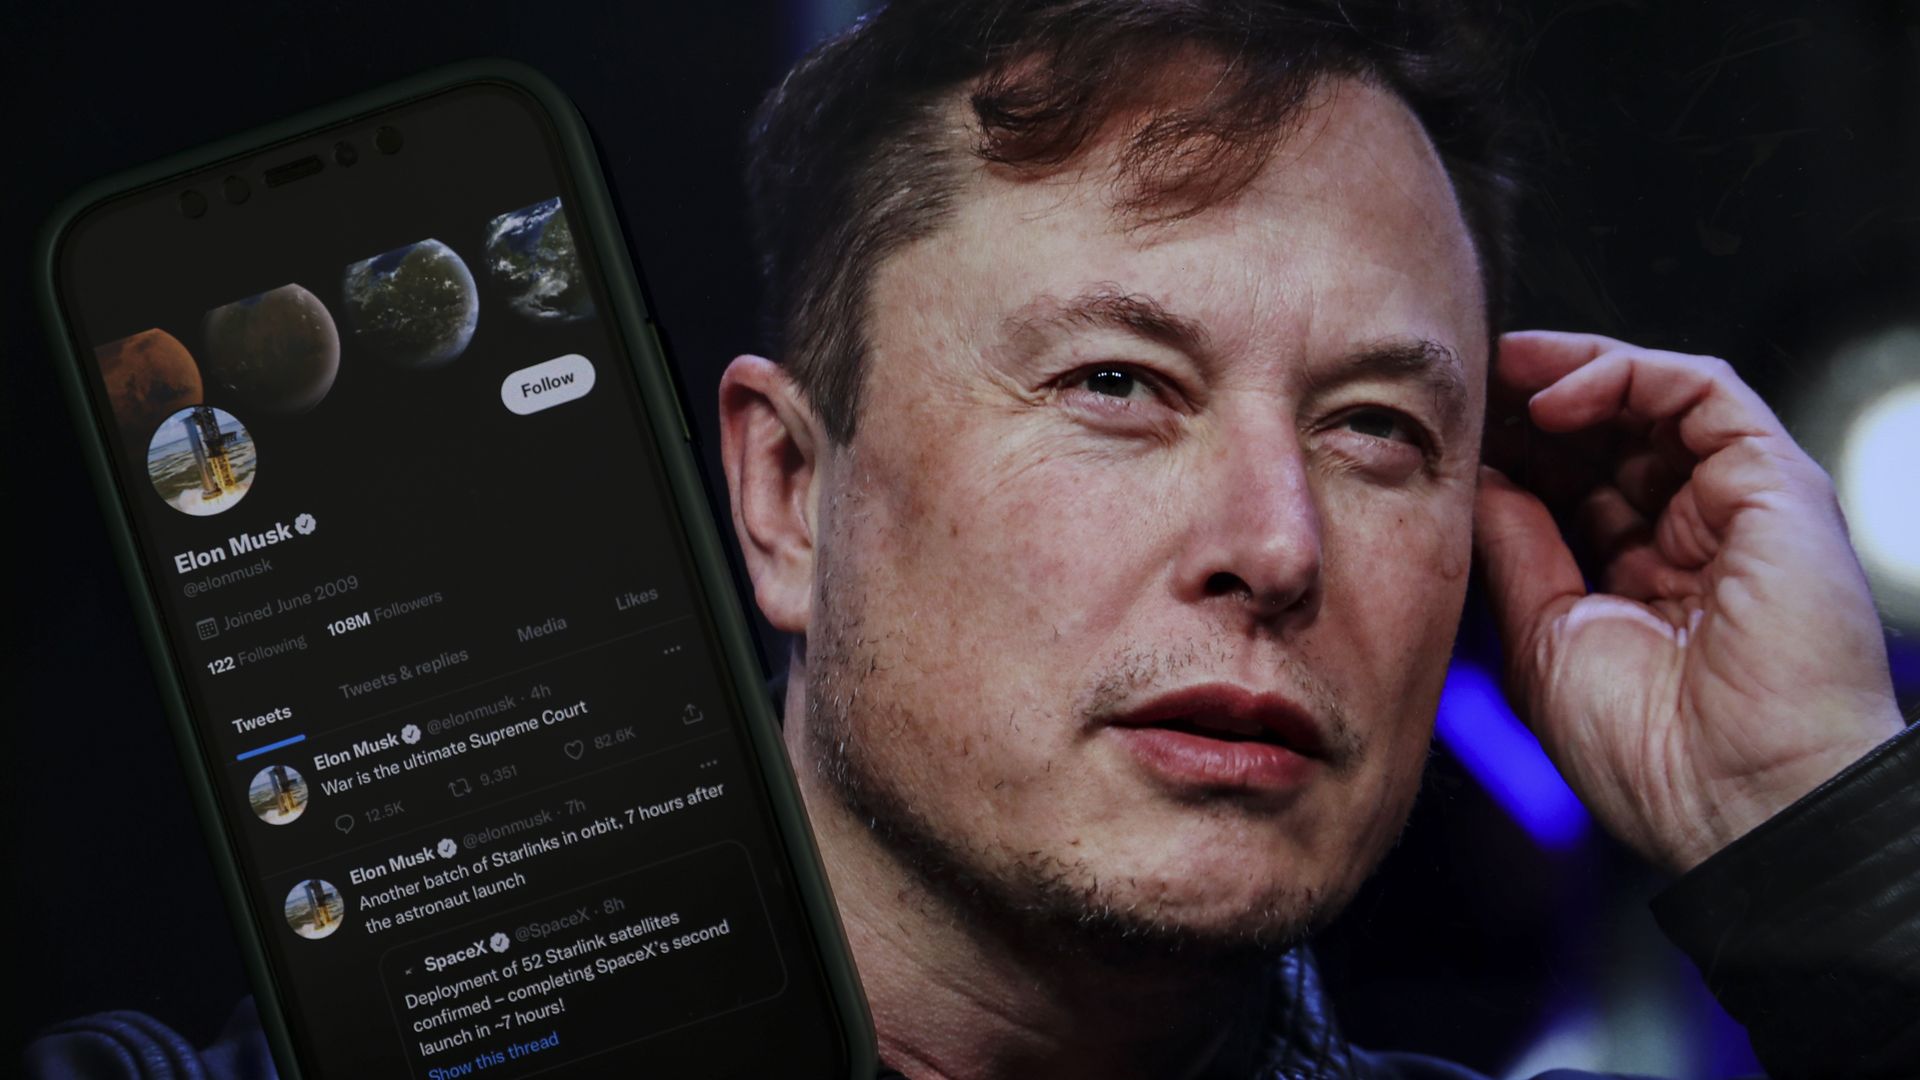 Elon Musk's twitter profile is displayed on a mobile phone.